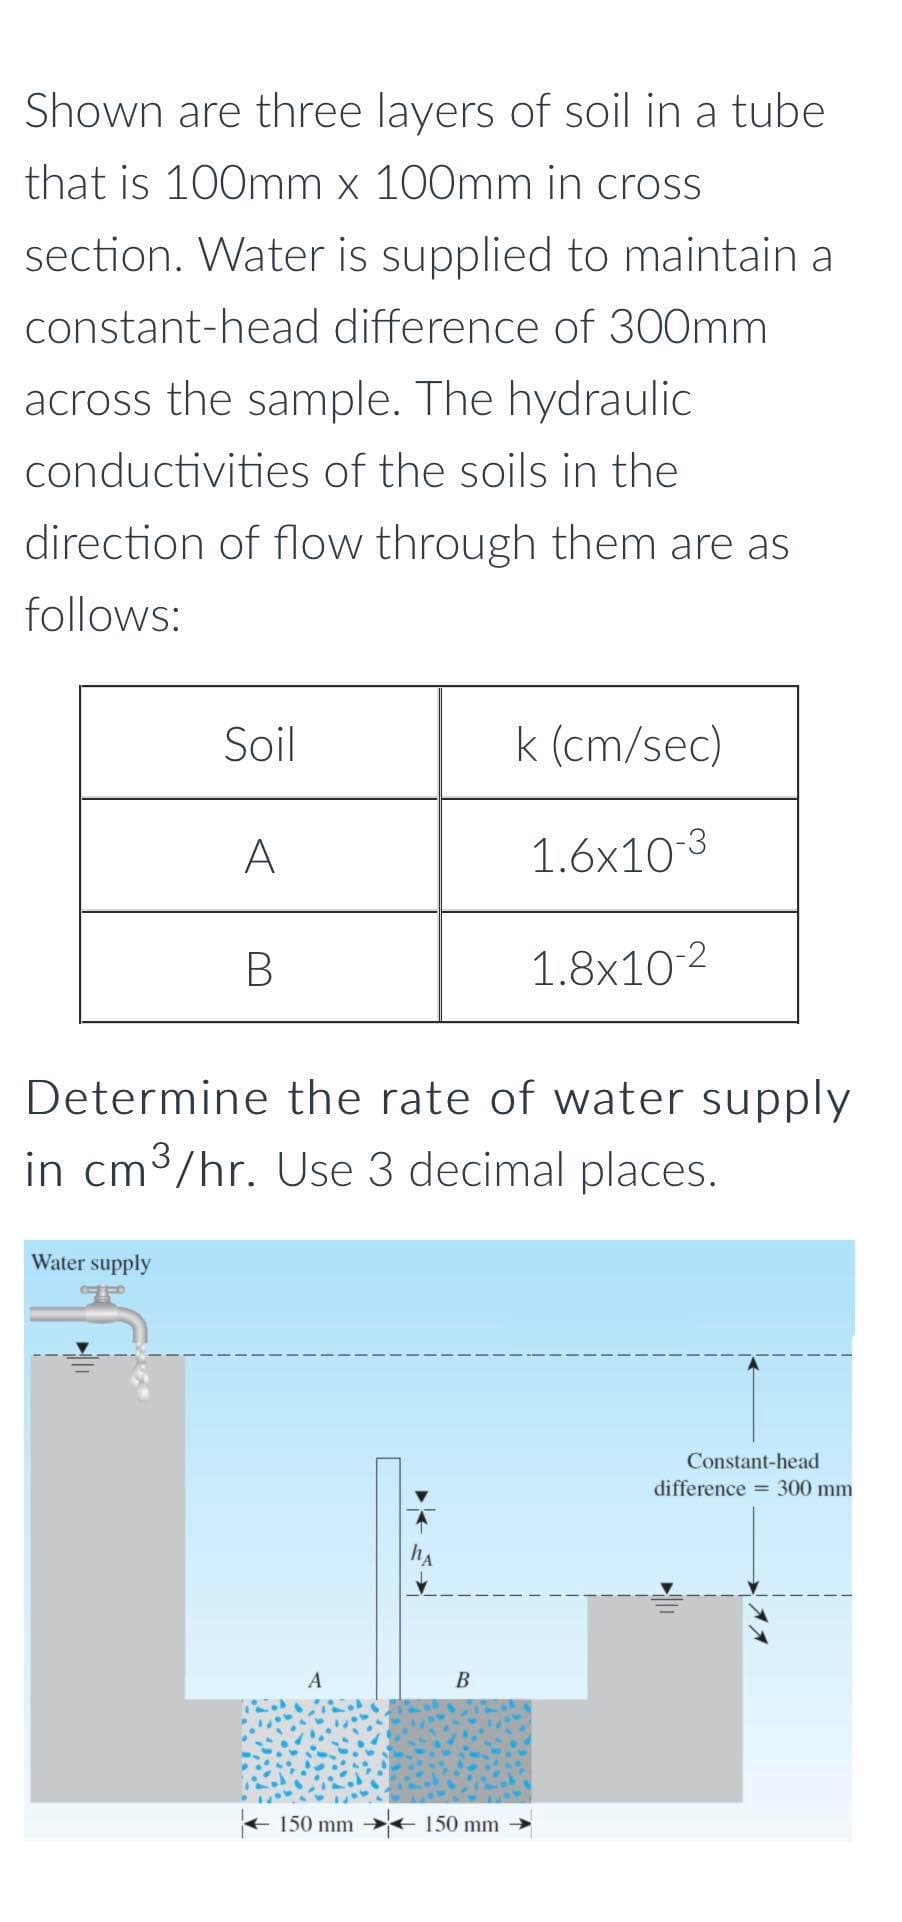 Shown are three layers of soil in a tube
that is 100mm x 100mm in cross
section. Water is supplied to maintain a
constant-head difference of 300mm
across the sample. The hydraulic
conductivities of the soils in the
direction of flow through them are as
follows:
Soil
k (cm/sec)
A
1.6x10-3
B
1.8x10-2
Determine the rate of water supply
in cm3/hr. Use 3 decimal places.
Water supply
Constant-head
difference = 300 mm
A
В
+ 150 mm > 150 mm
